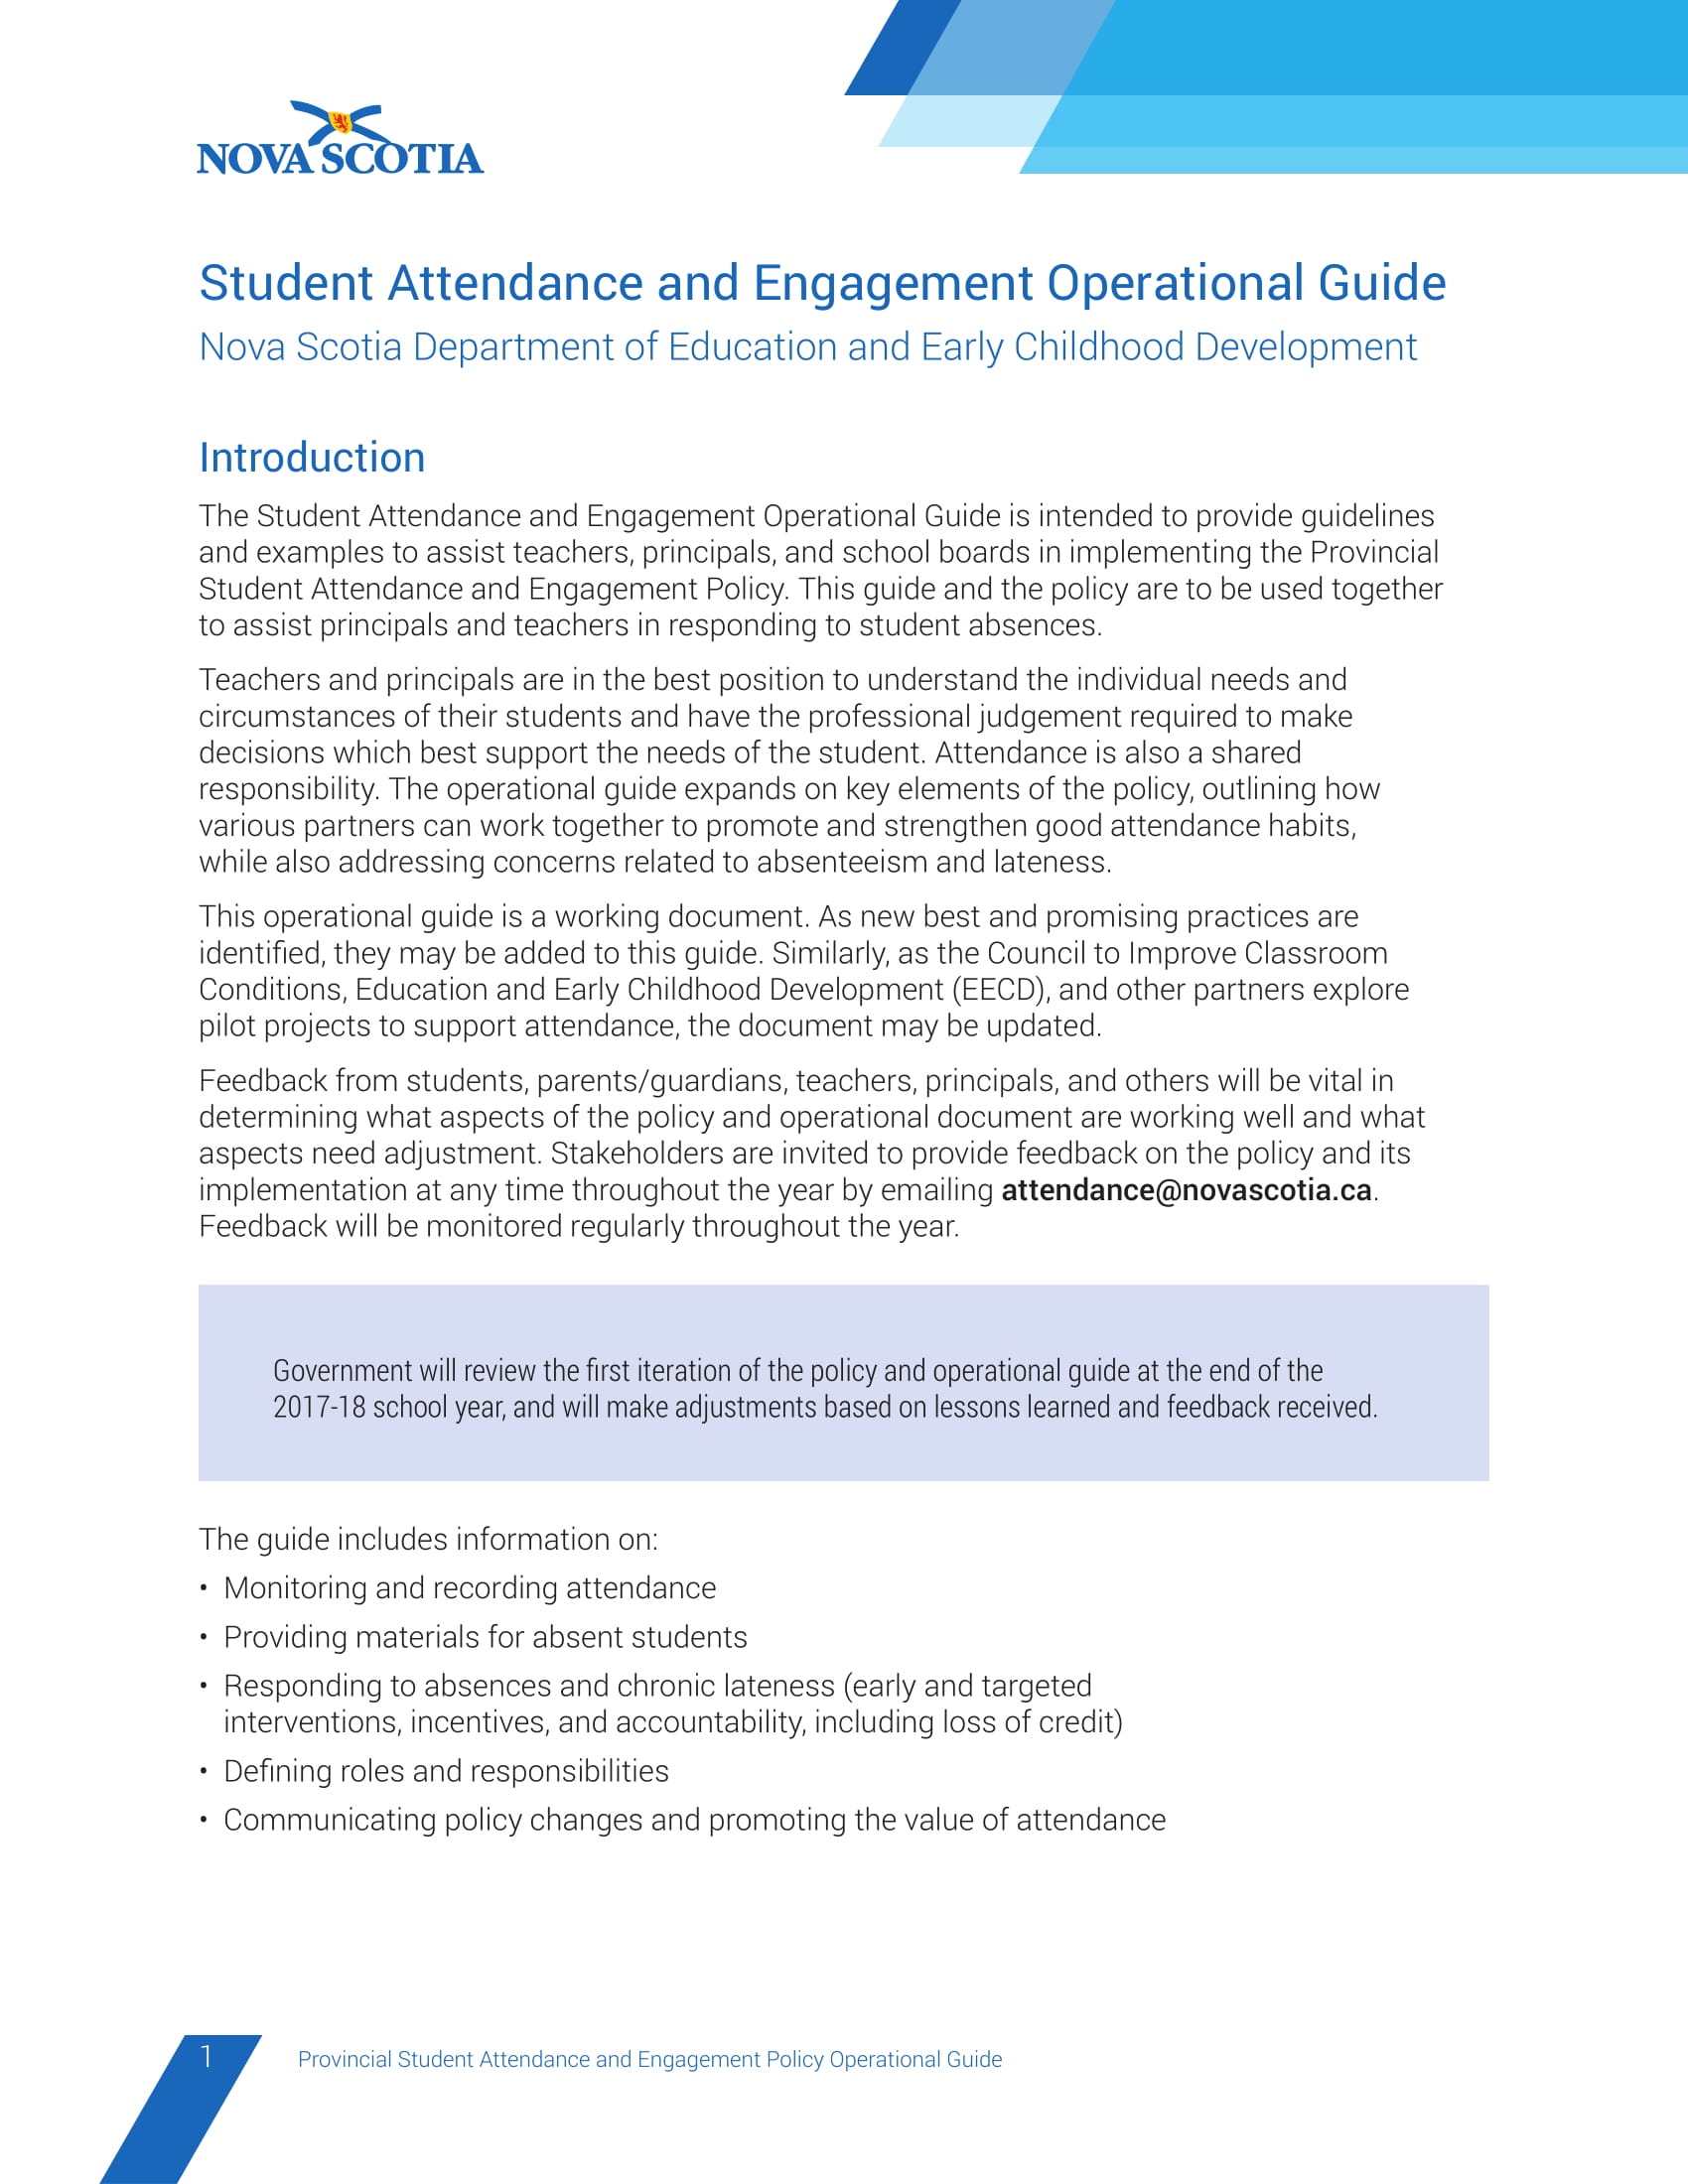 contract agreement for student attendance and engagement operational guide example 01